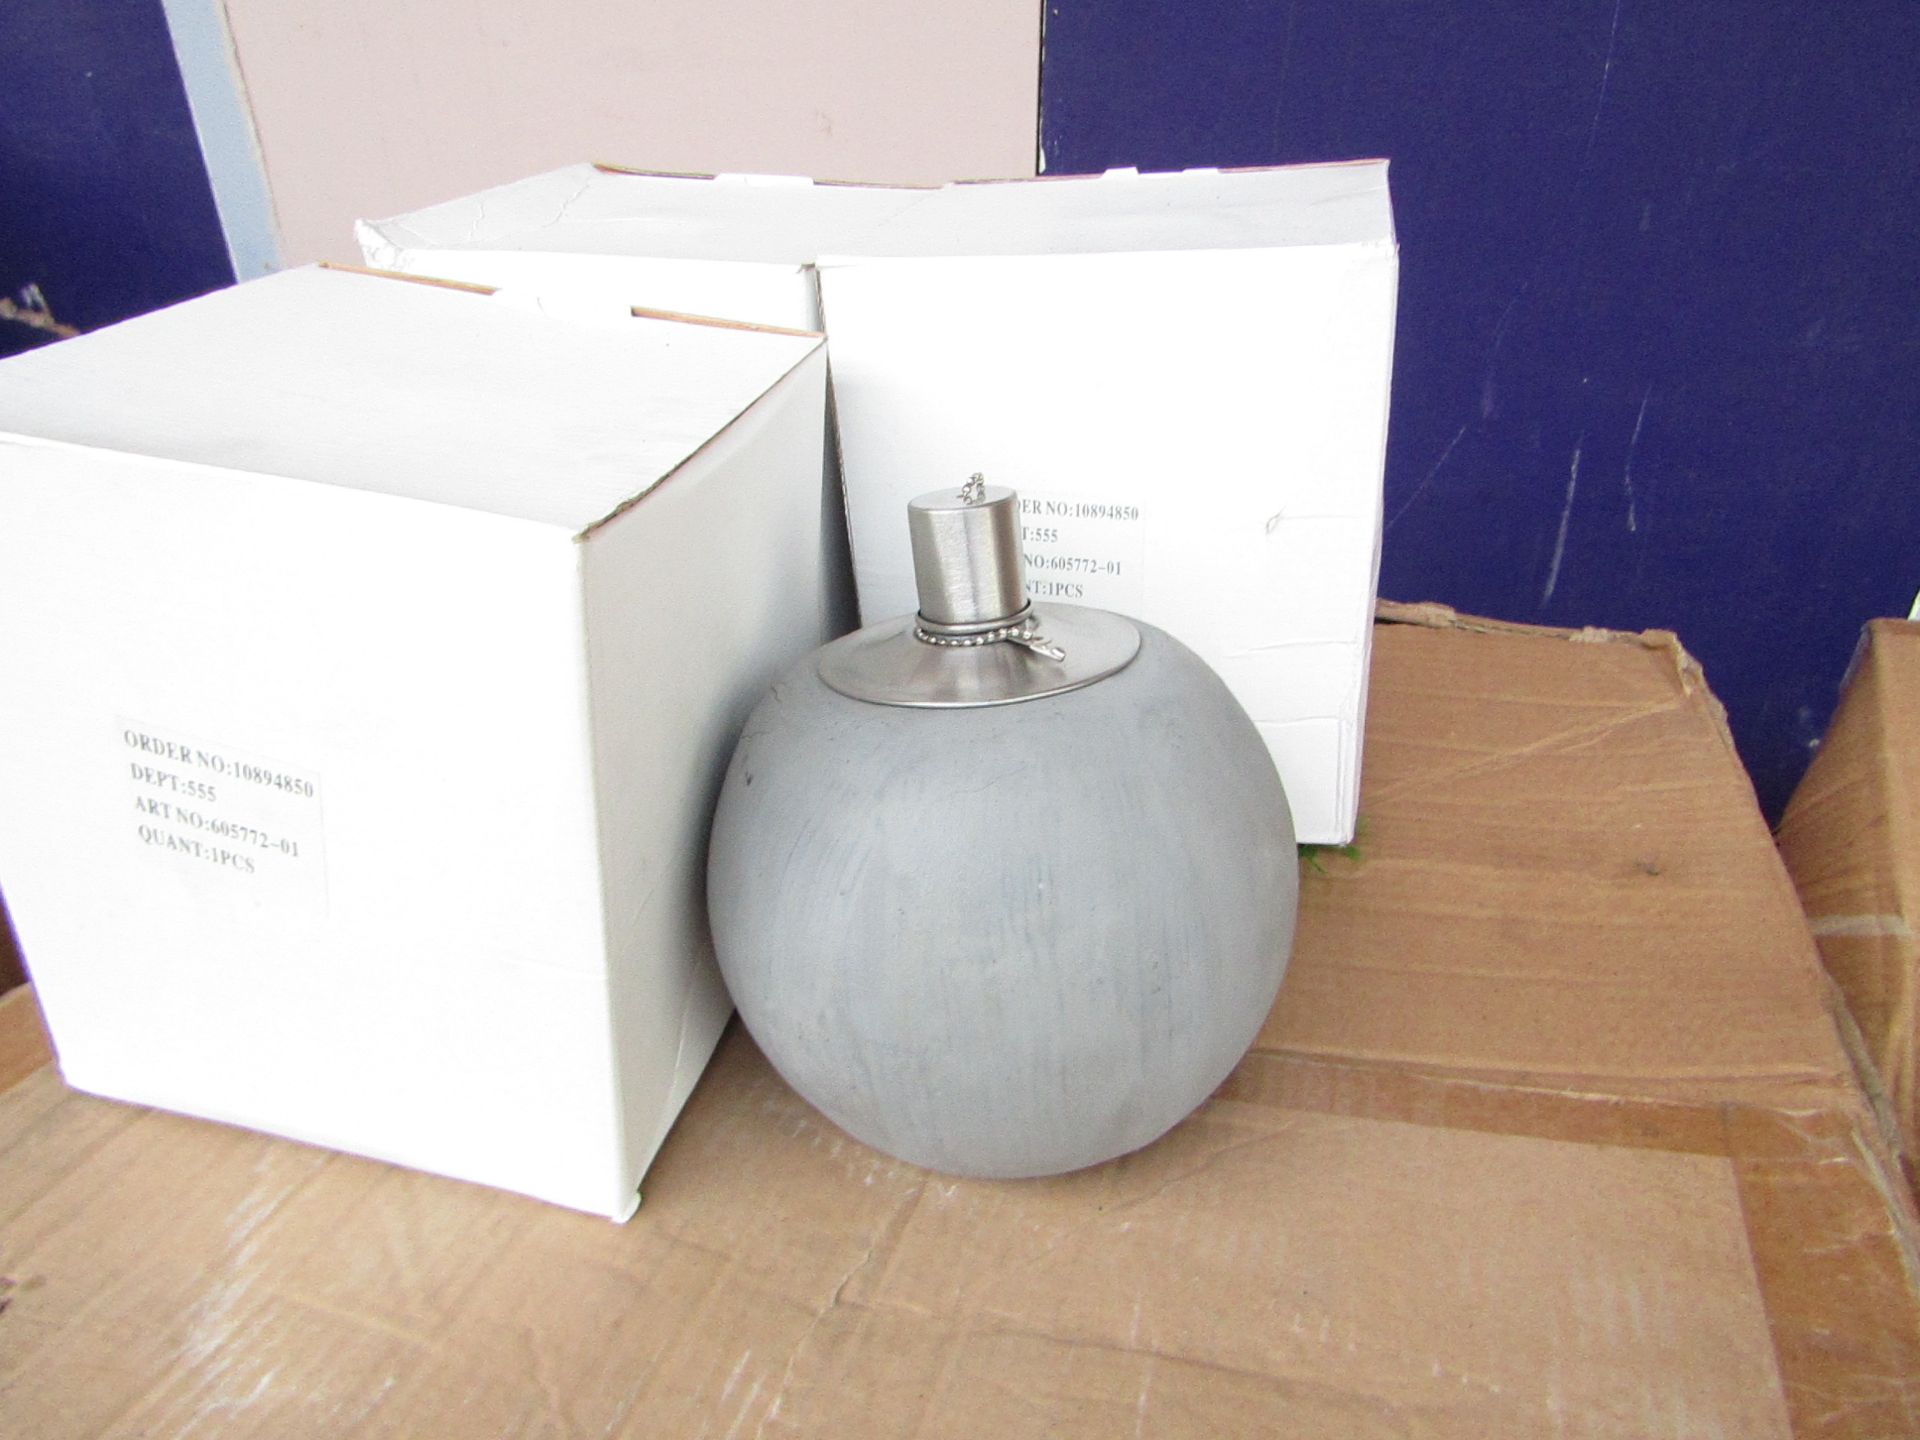 5x Grey Concrete Citronella Oil Garden Table Lamp Light - Unchecked & Boxed - RRP £24.99 For Each